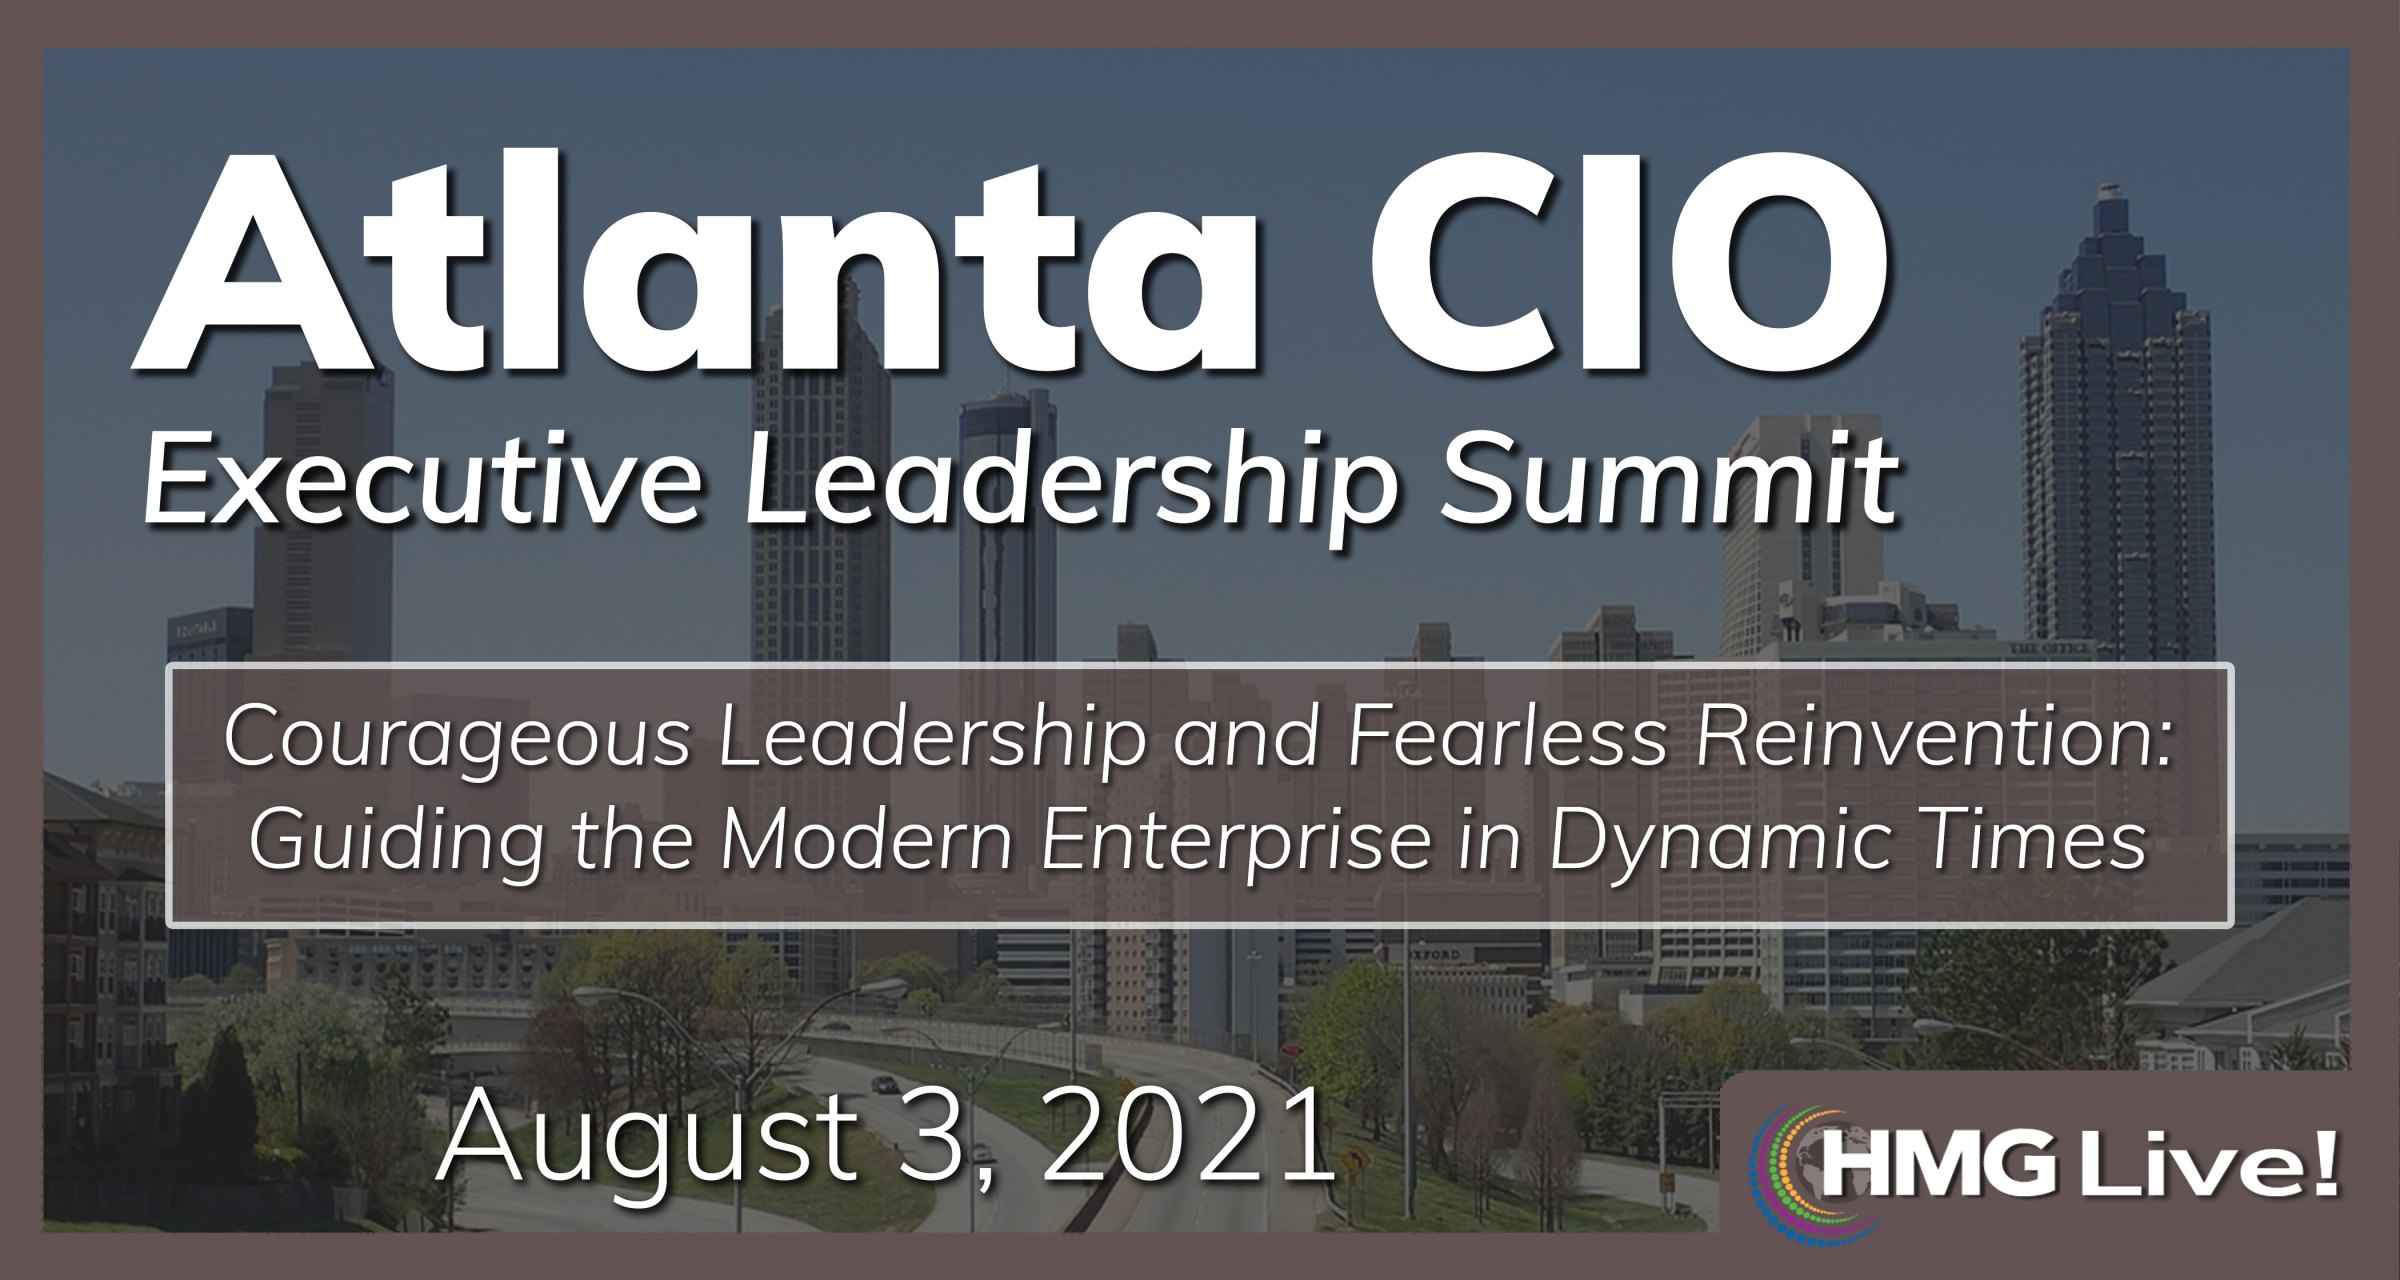 CIO Leadership: Embracing Resilient Leadership to Confidently Navigate Today’s Demanding Business Environment Will Drive the Discussion at HMG Strategy’s First In-Person Event for 2021 in Atlanta on August 3